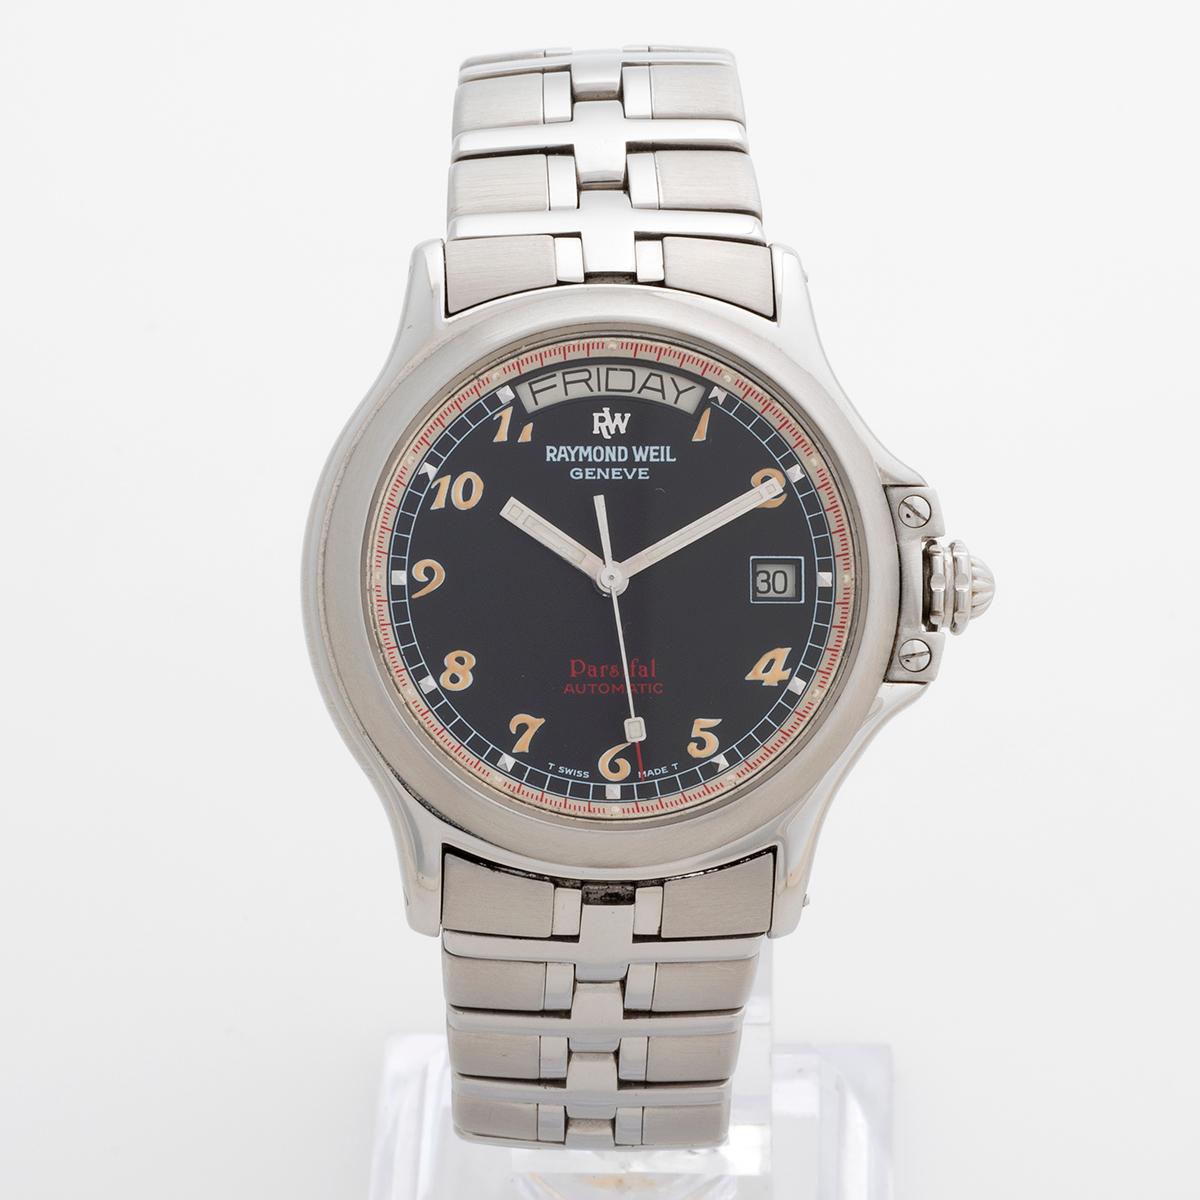 Our extremely rare Raymond Weil reference is an early example of the Parsifal range and is a range topping Day-Date automatic with jumbo stainless steel case (42mm x 42mm inc crown, 39mm exc crown) and stainless steel case. Of note is the dial, with